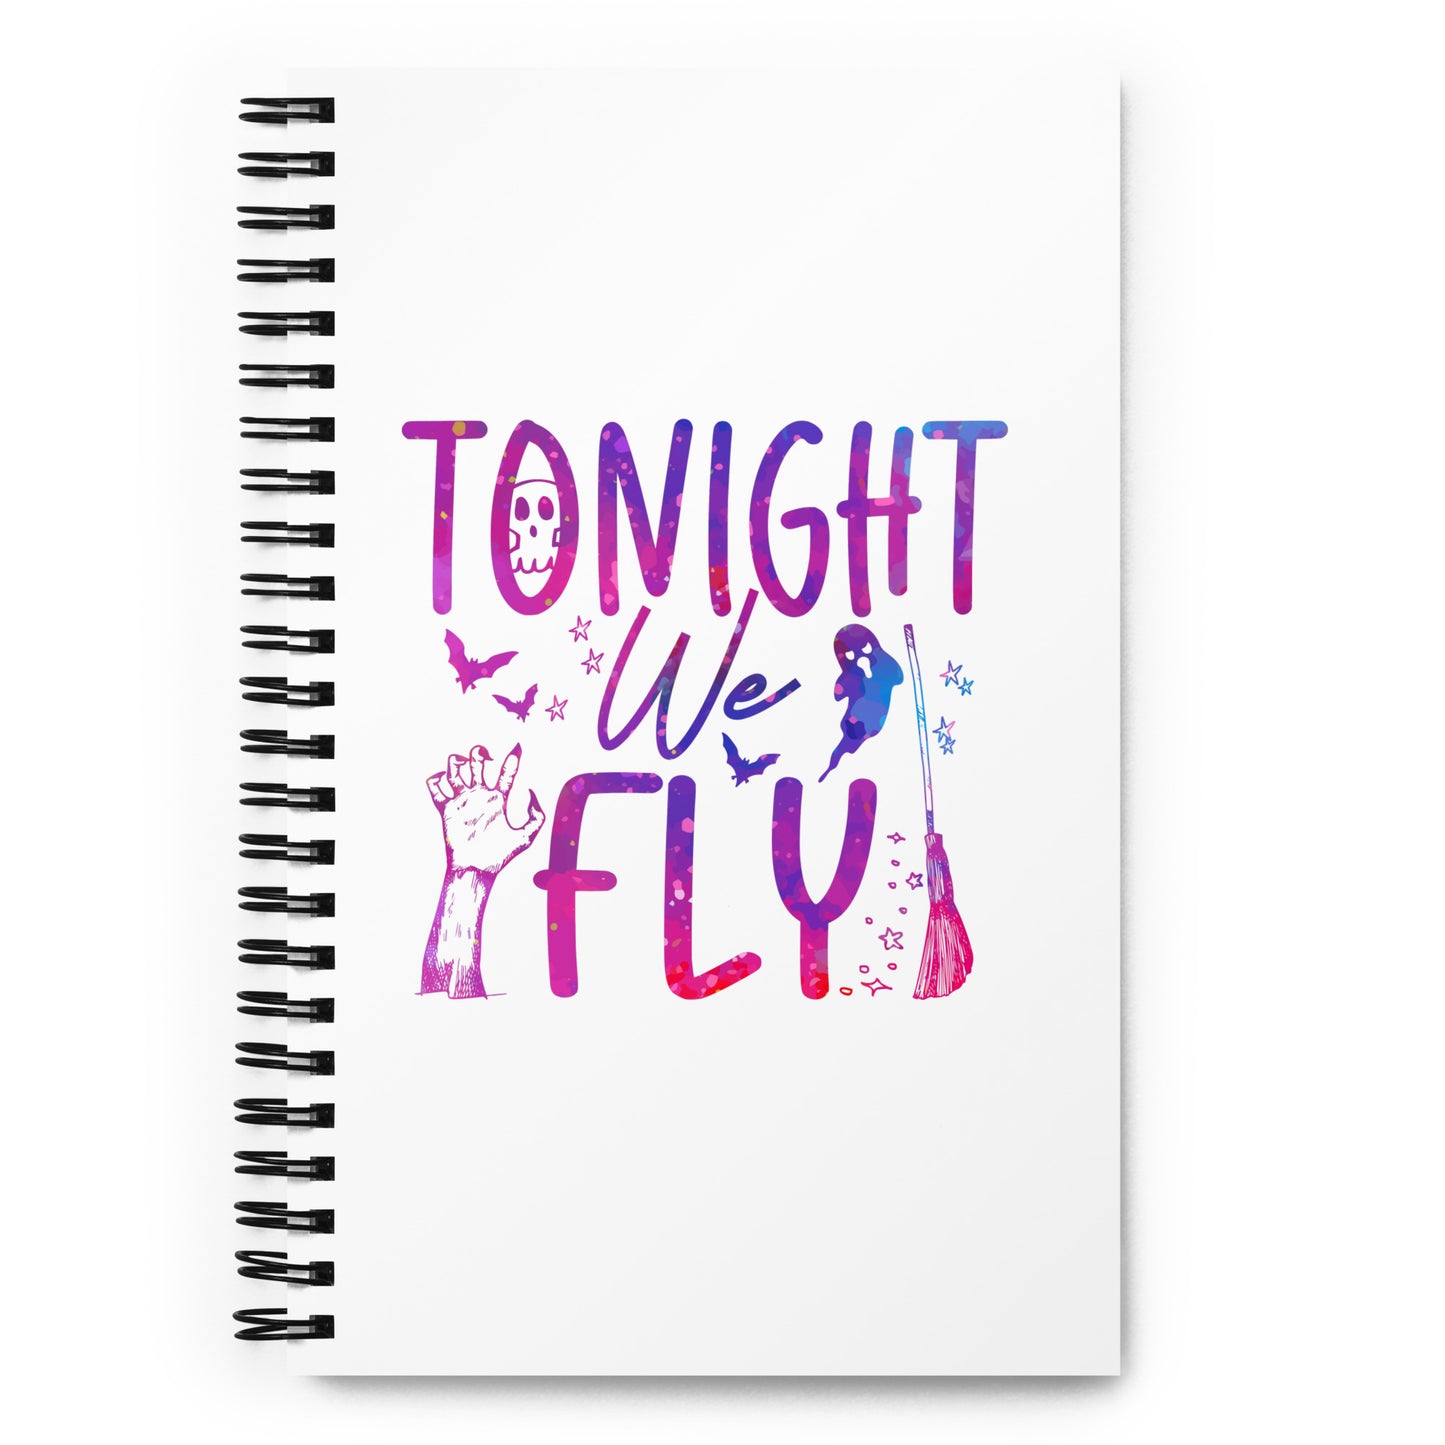 Tonight We Fly Spiral notebook